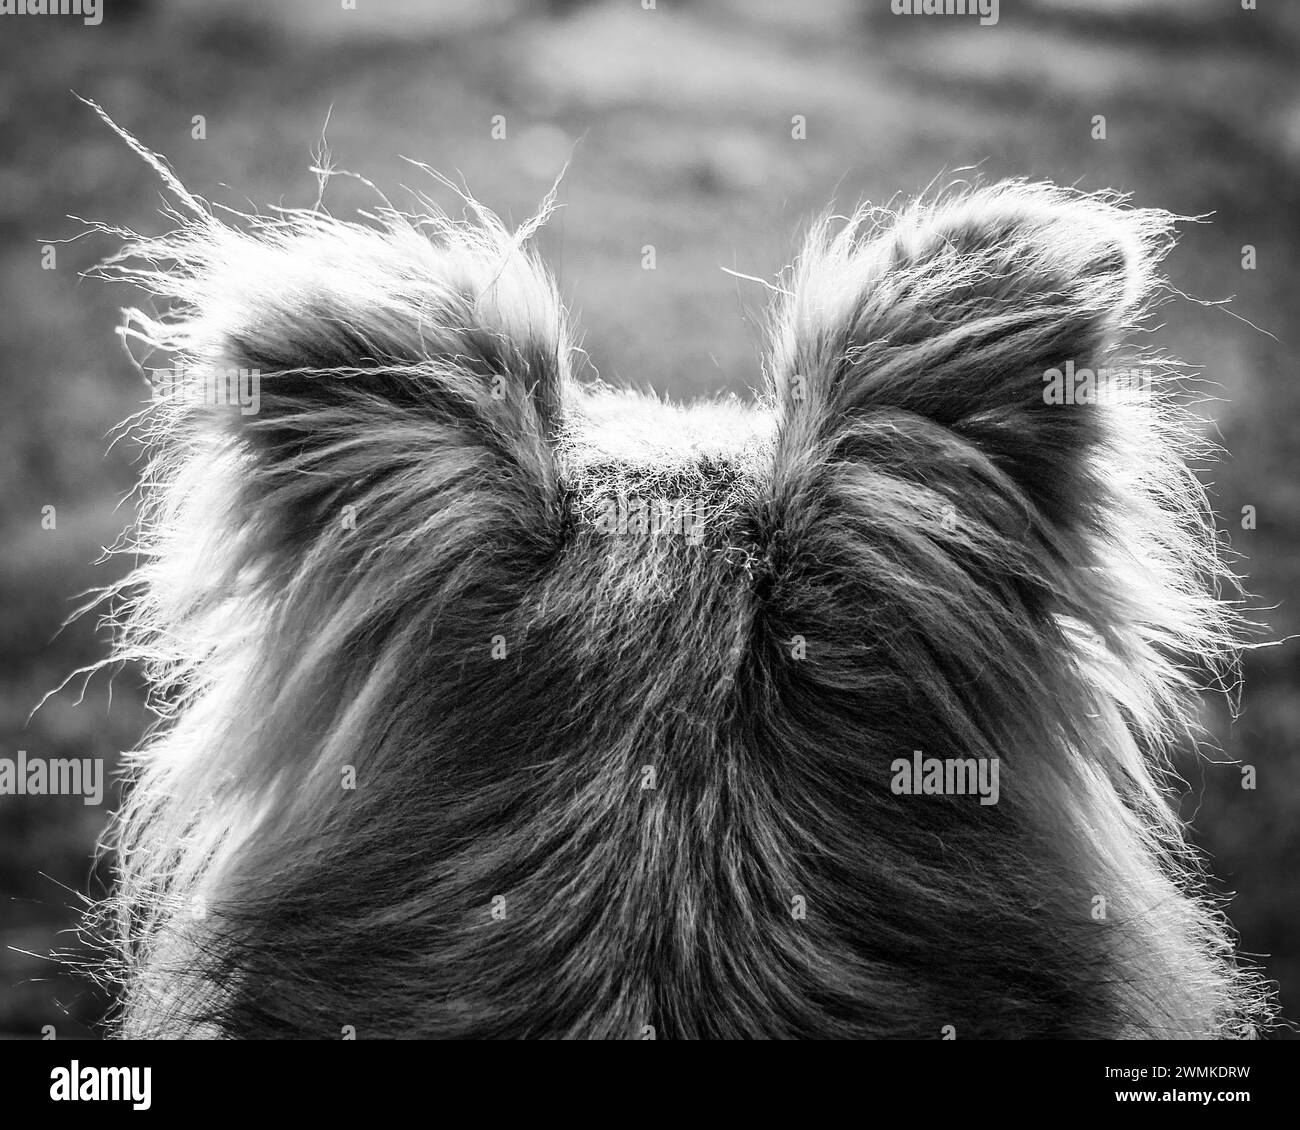 Close-up view taken from behind of sunlight haloing the hair on a mixed breed dog's head (canis lupus familiaris) as seen from the back in this bla... Stock Photo